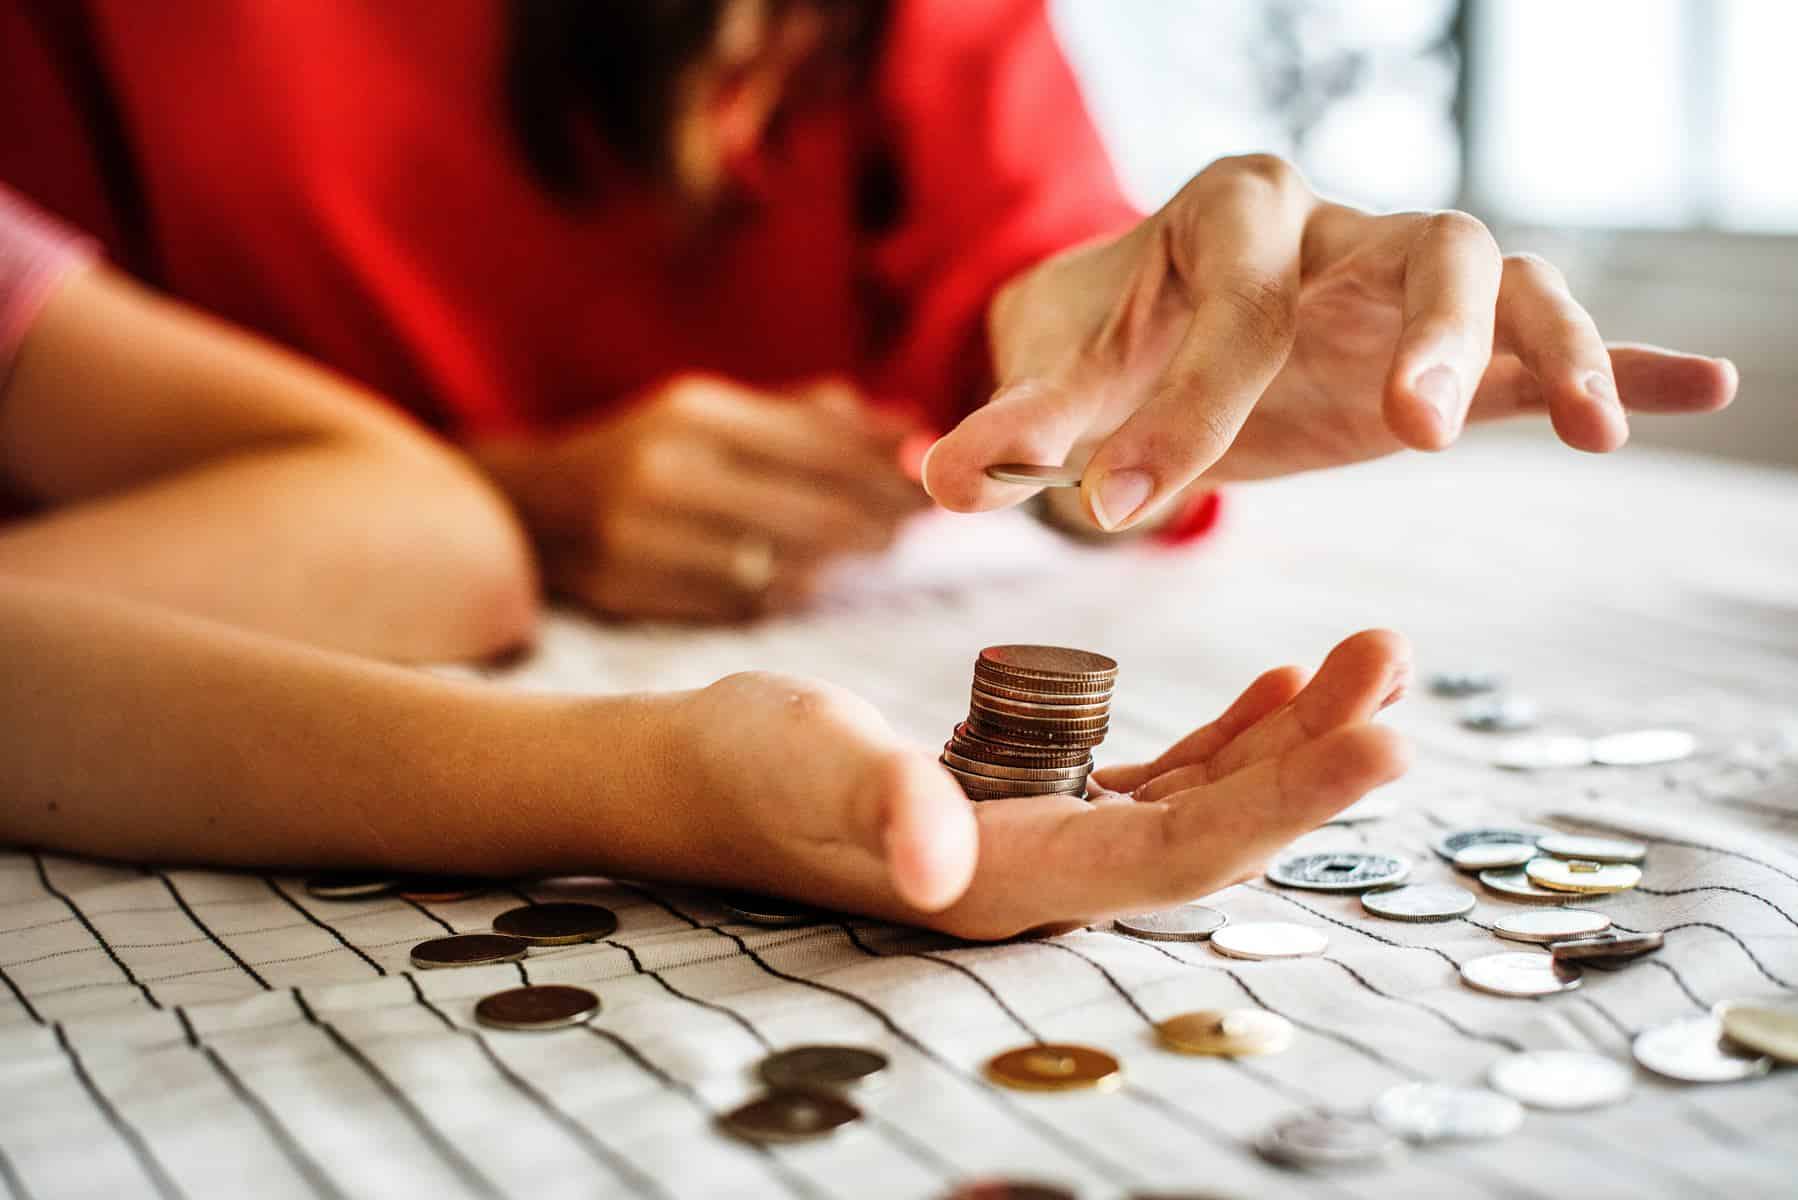 6 Ways To Teach Your Kids About Finance